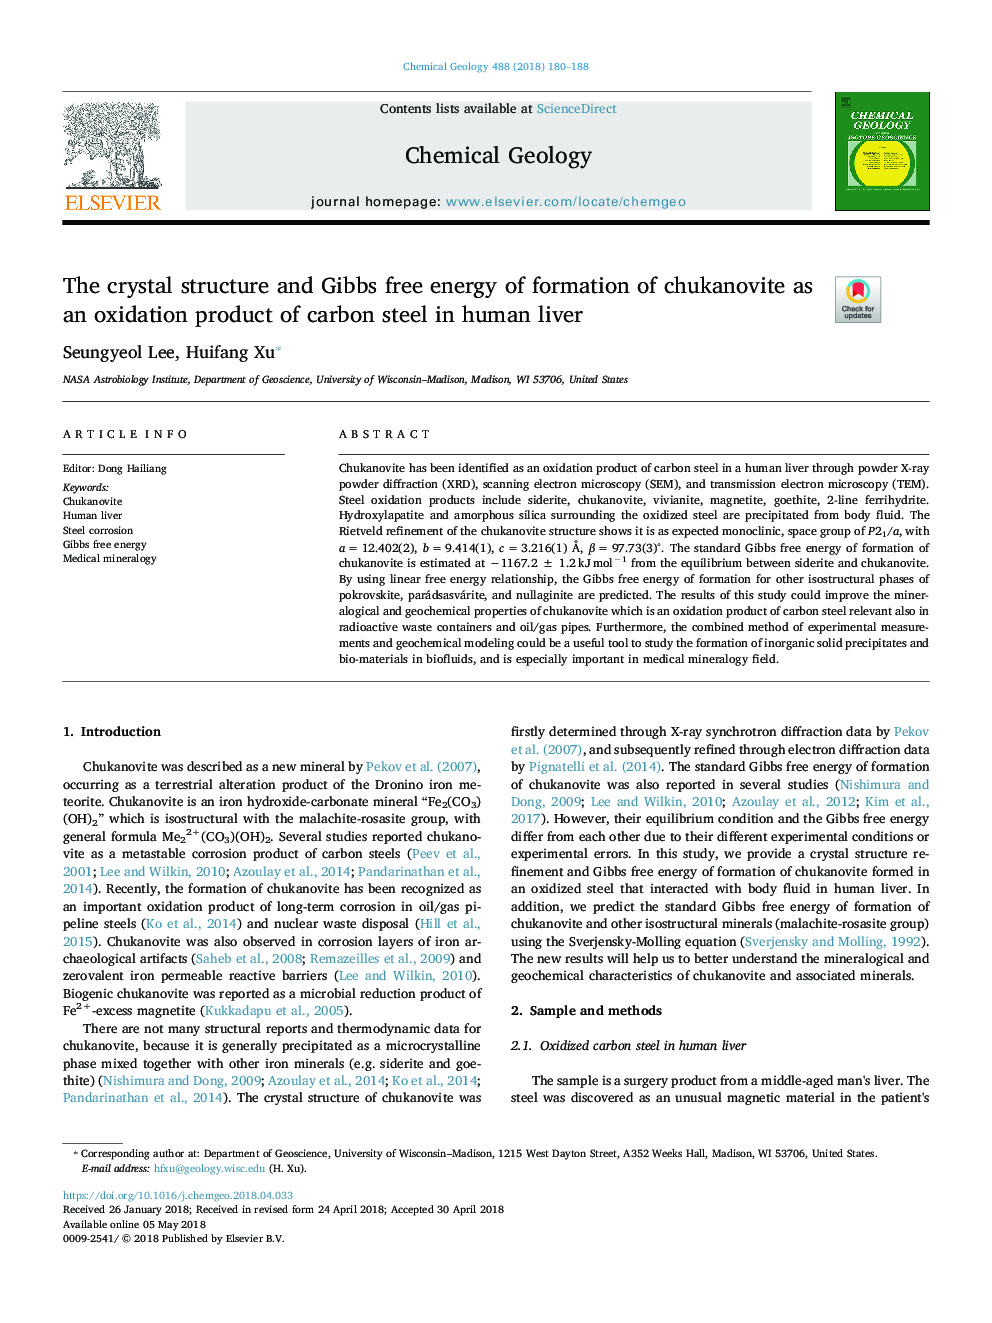 The crystal structure and Gibbs free energy of formation of chukanovite as an oxidation product of carbon steel in human liver